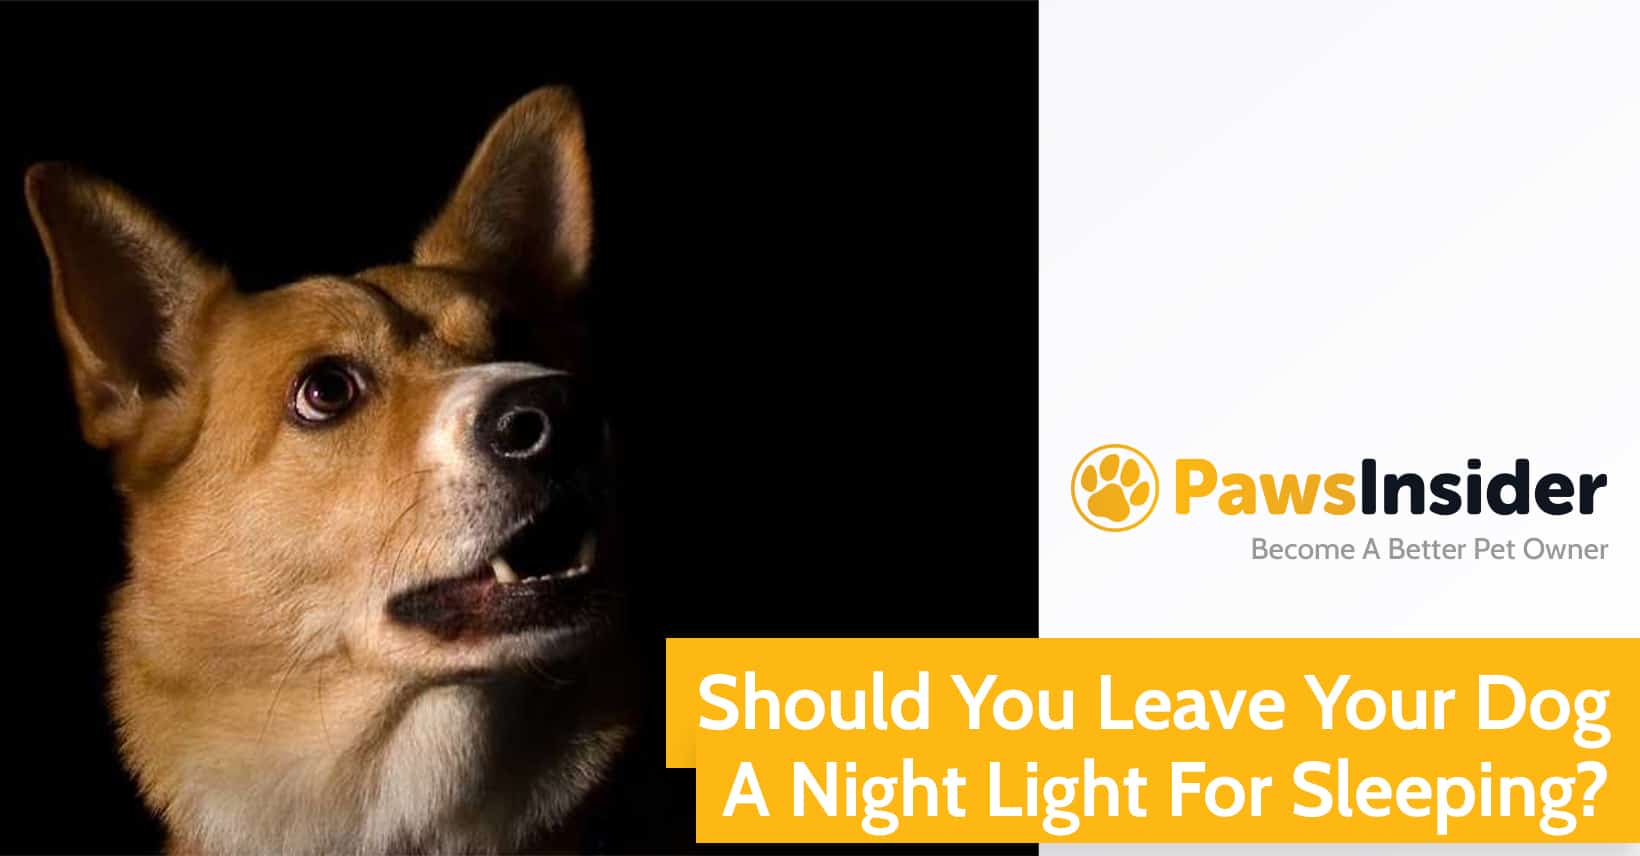 Should You Leave Your Dog a Night Light for Sleeping?